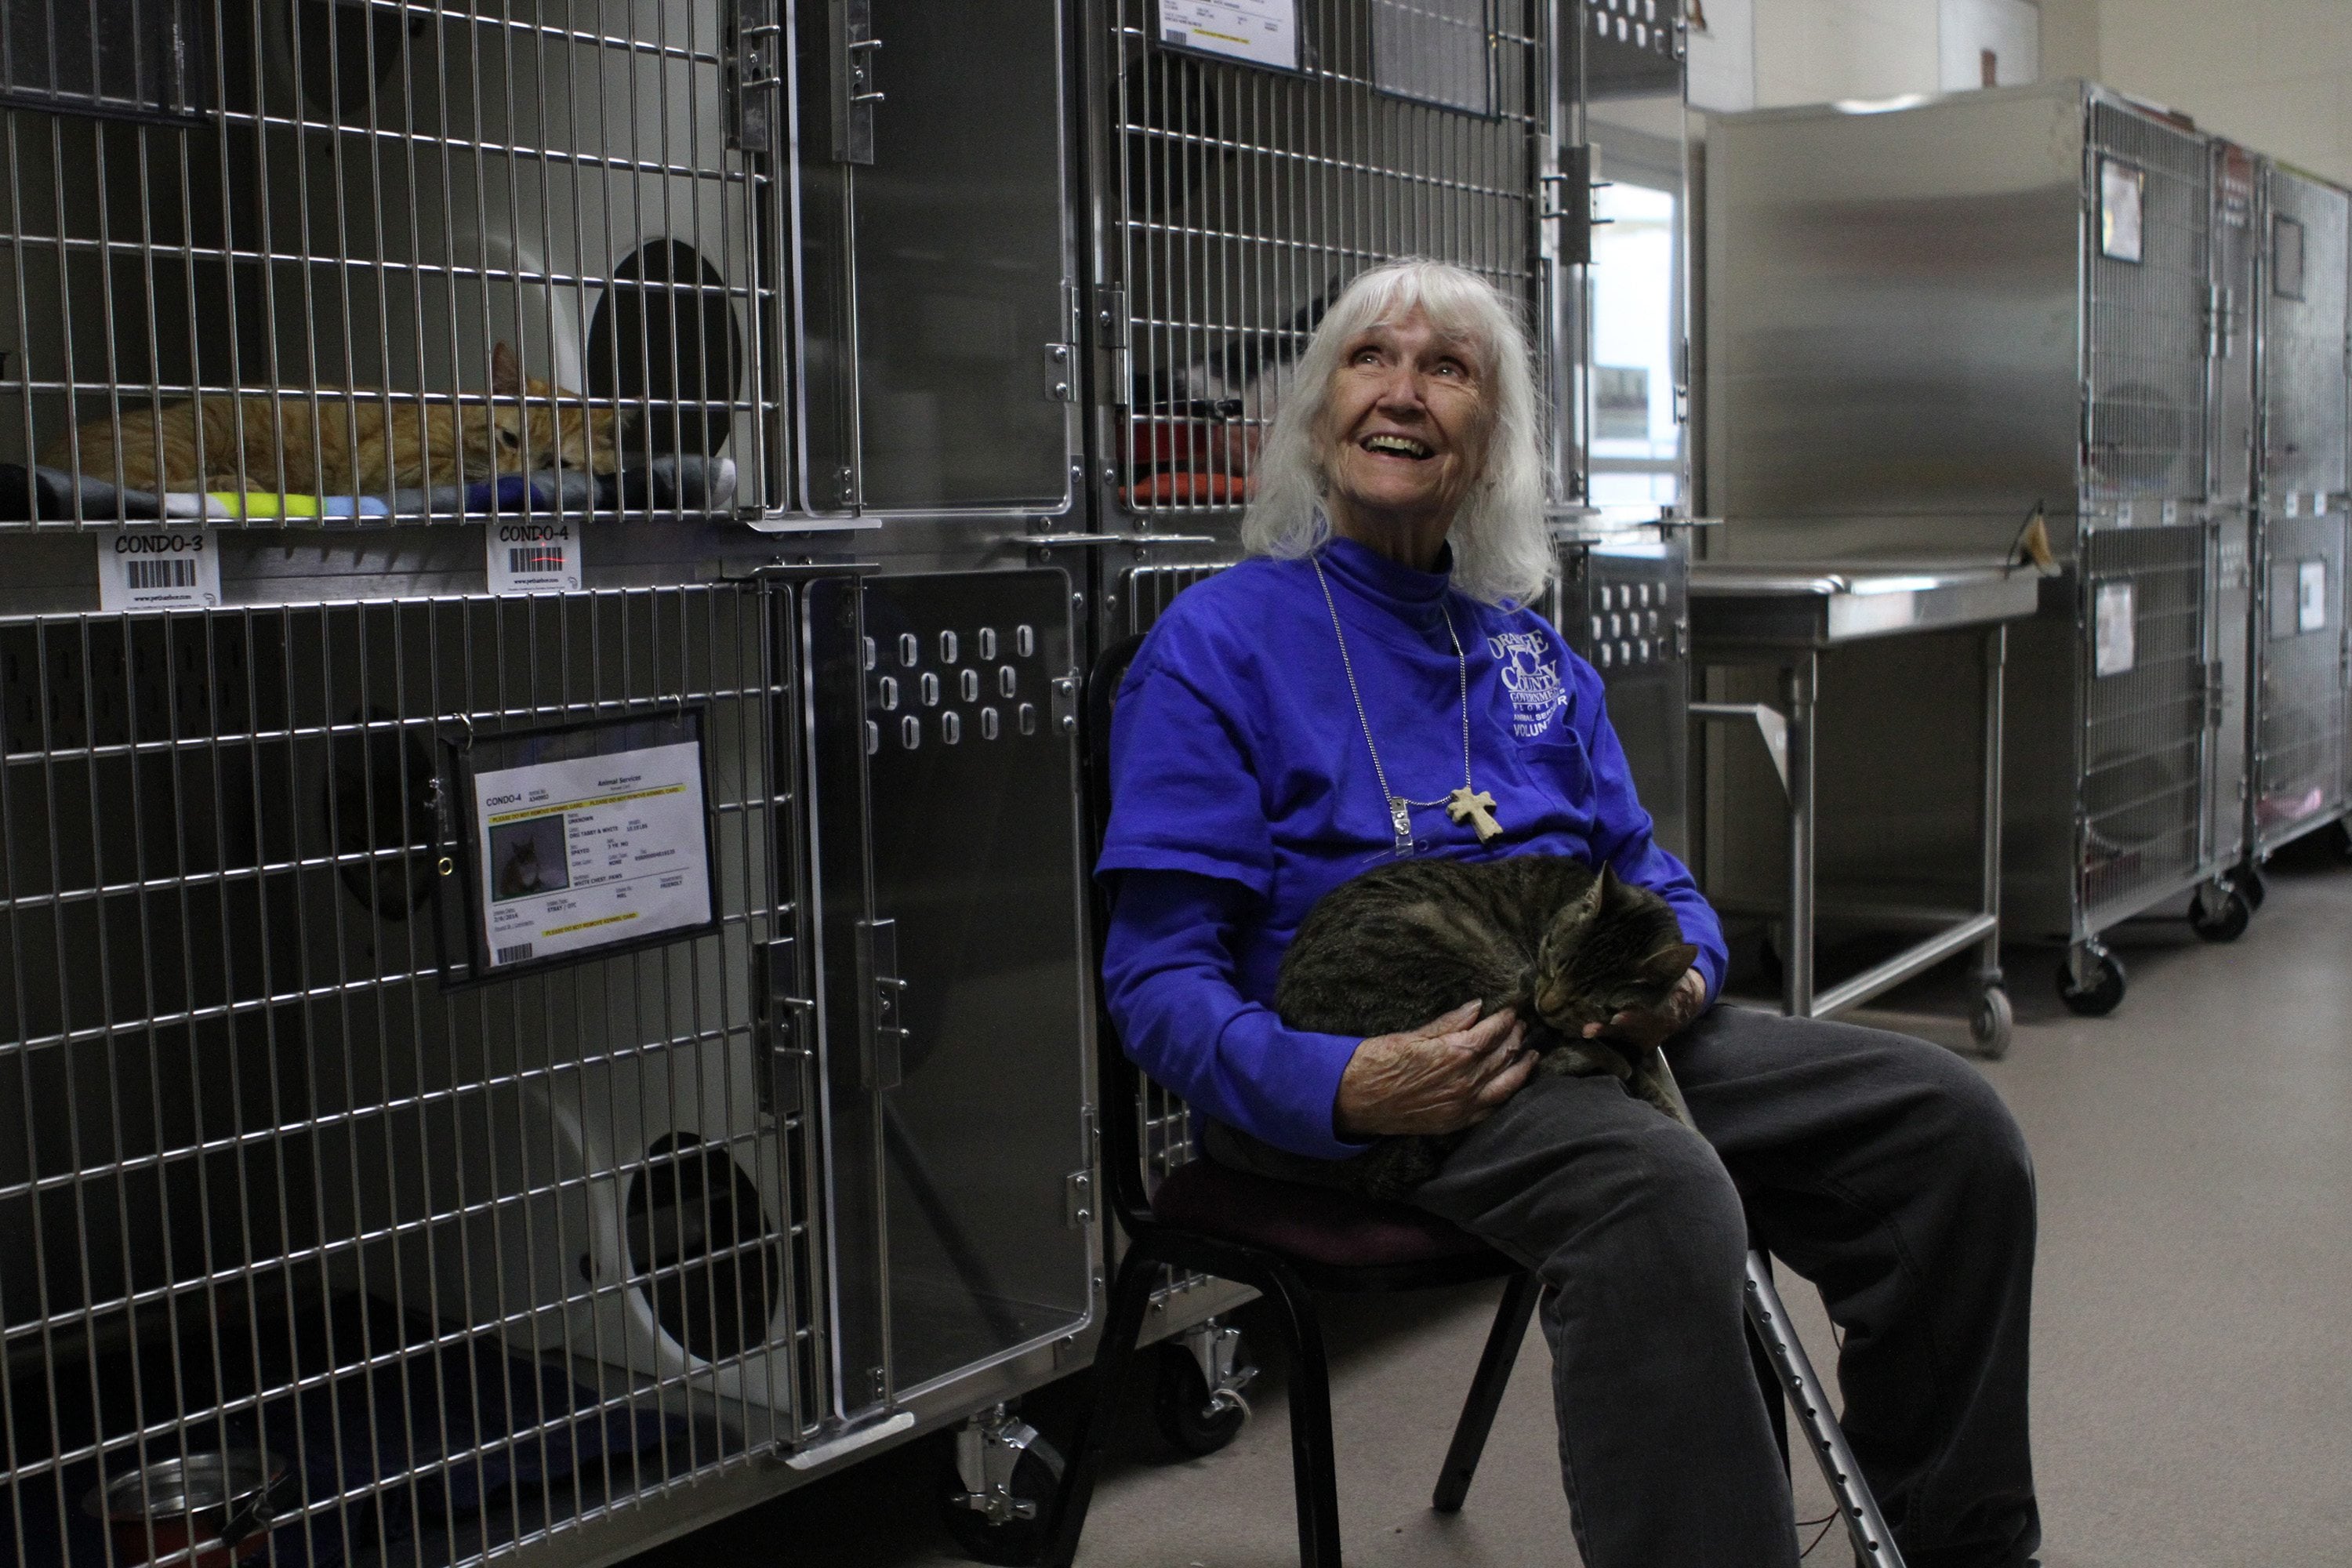 Fleur de Lys Healy, 85, visits the Orange County Animal Shelter at least once a week, every week, to look for her missing cat.